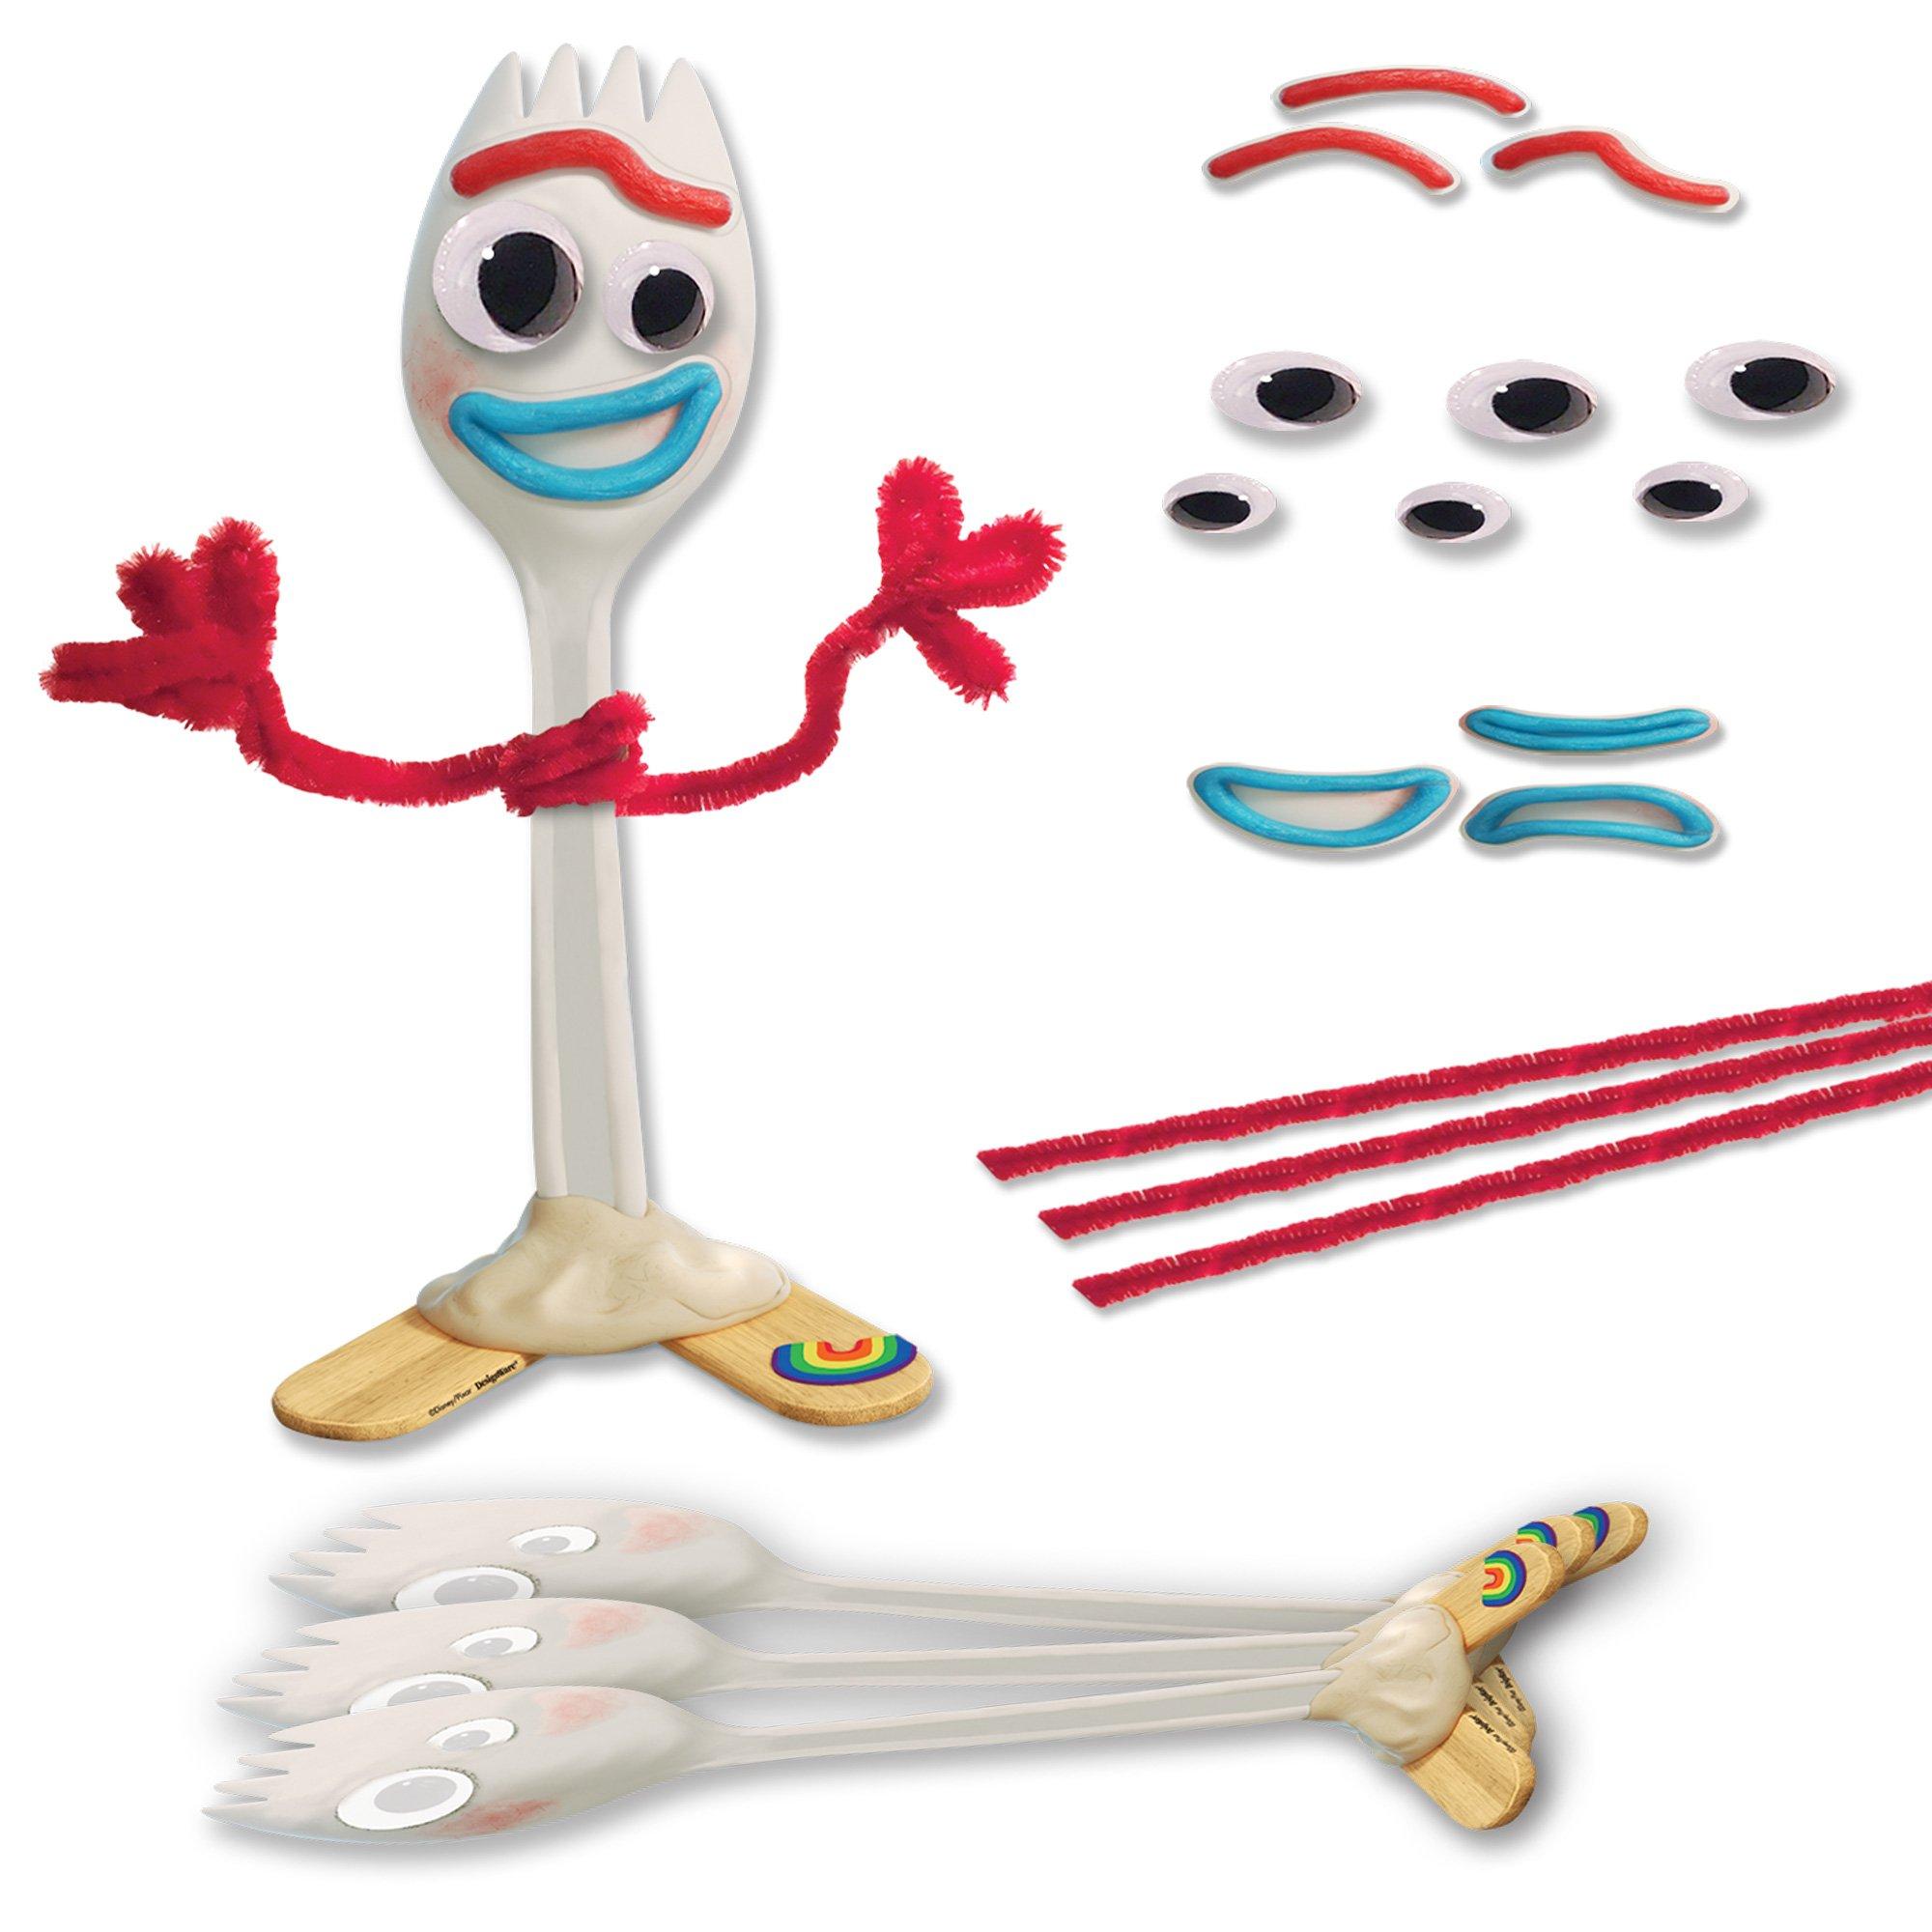 Craft Kit Make Your Own Forky From Toy Story 4 -  Hong Kong